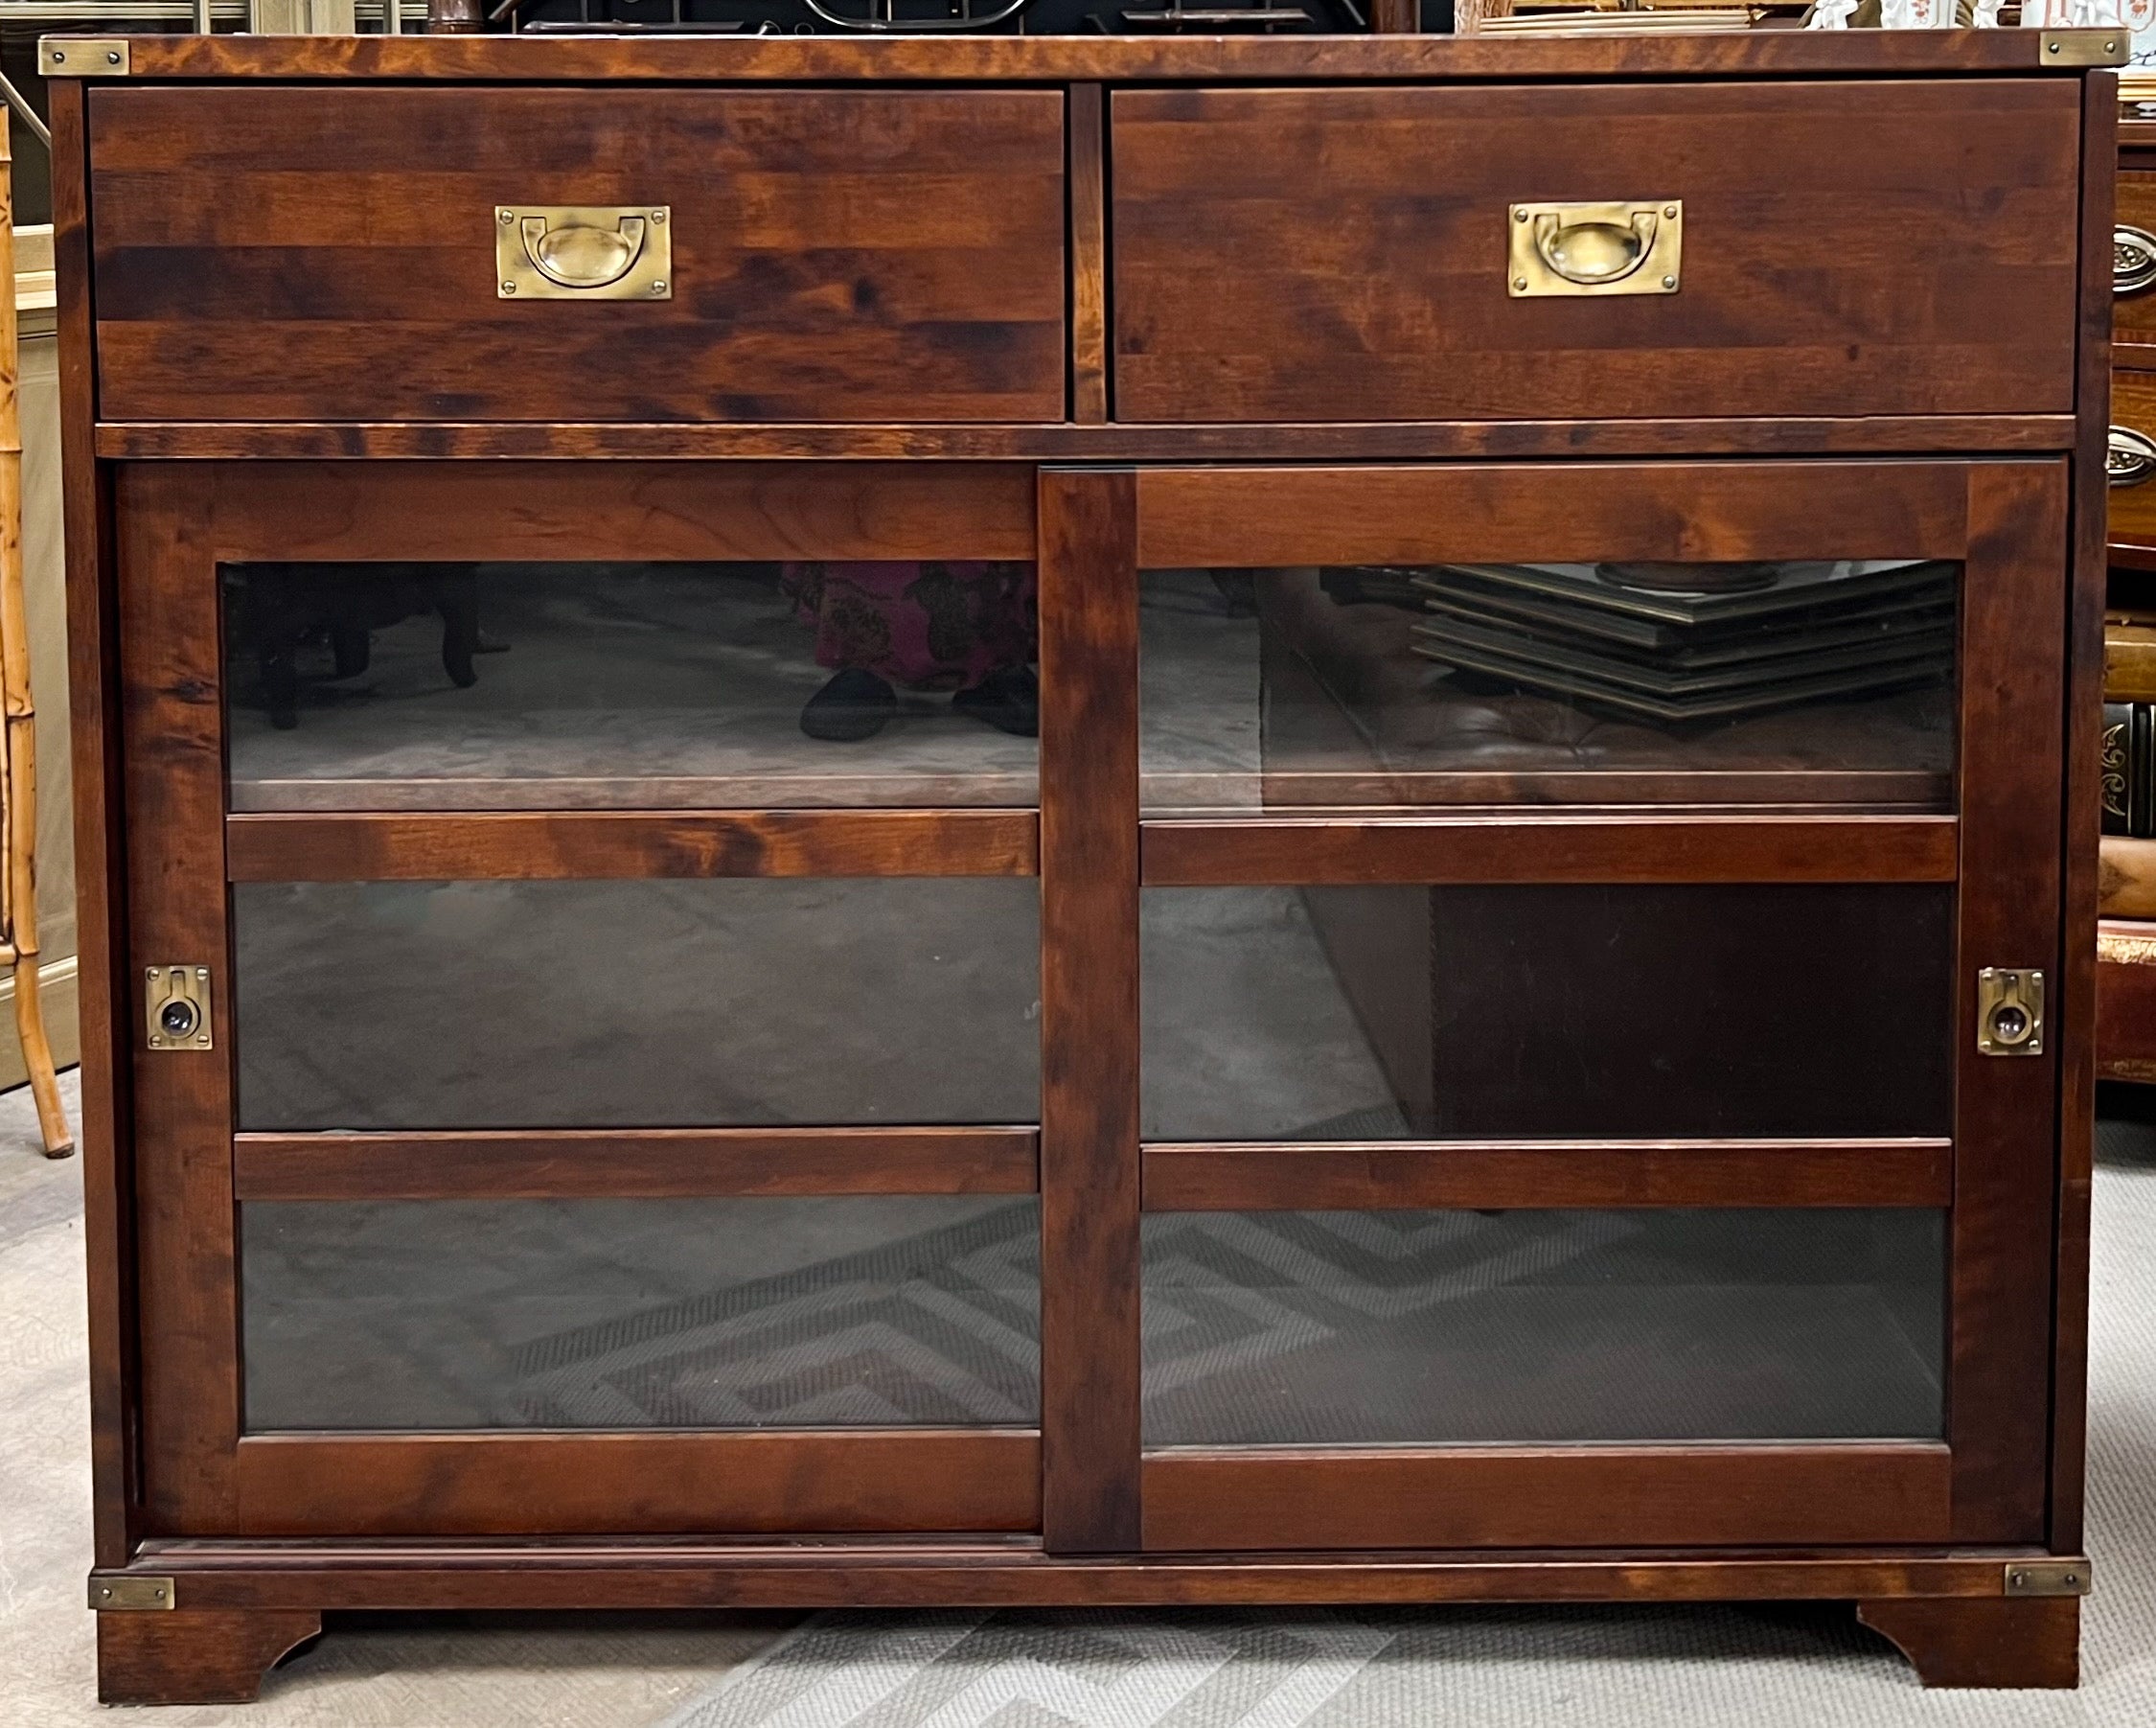 This is an English campaign style mahogany and brass bookcase with sliding doors and two adjustable shelves. It is unmarked and in very good condition.